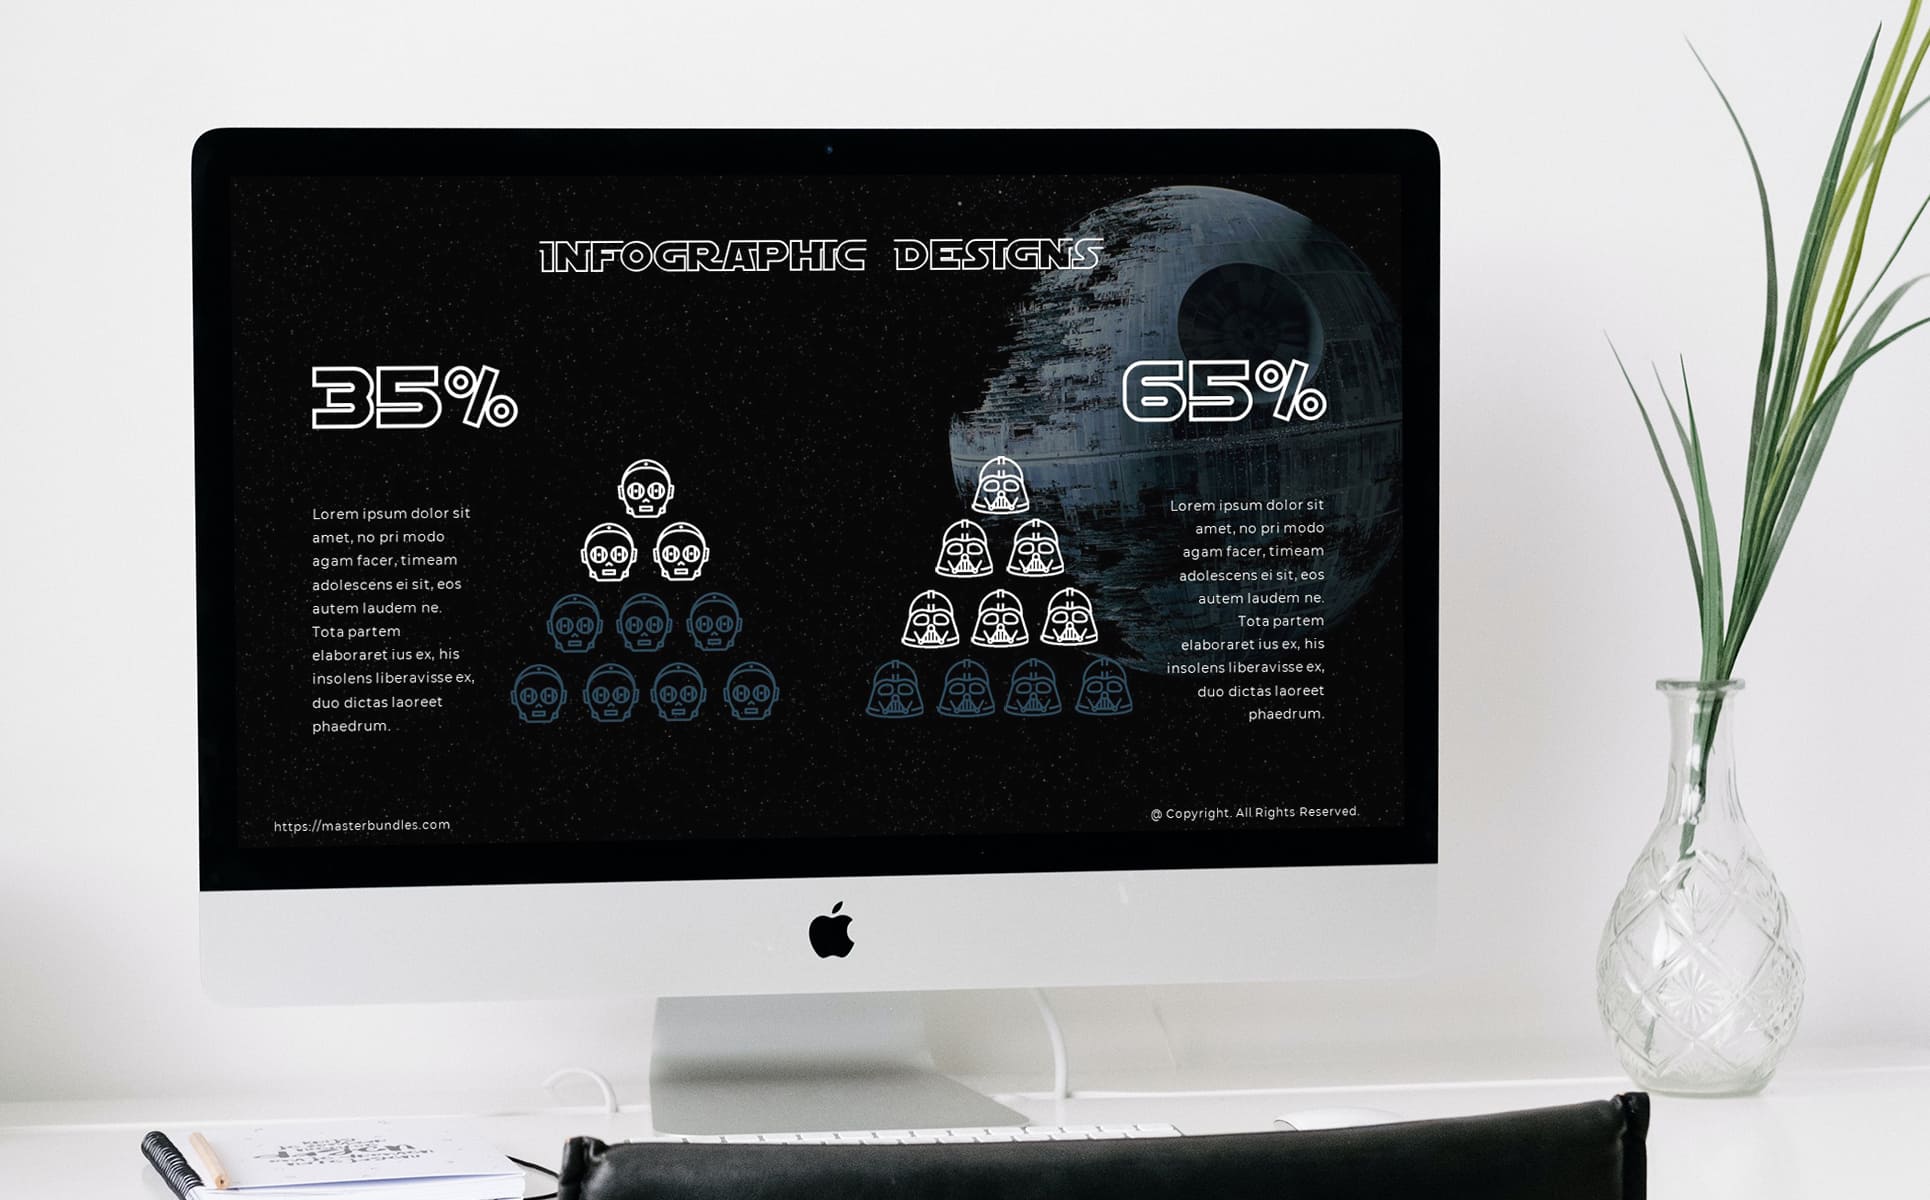 Slide view of the presentation on a monoblock with thematic infographics with Star Wars icons.